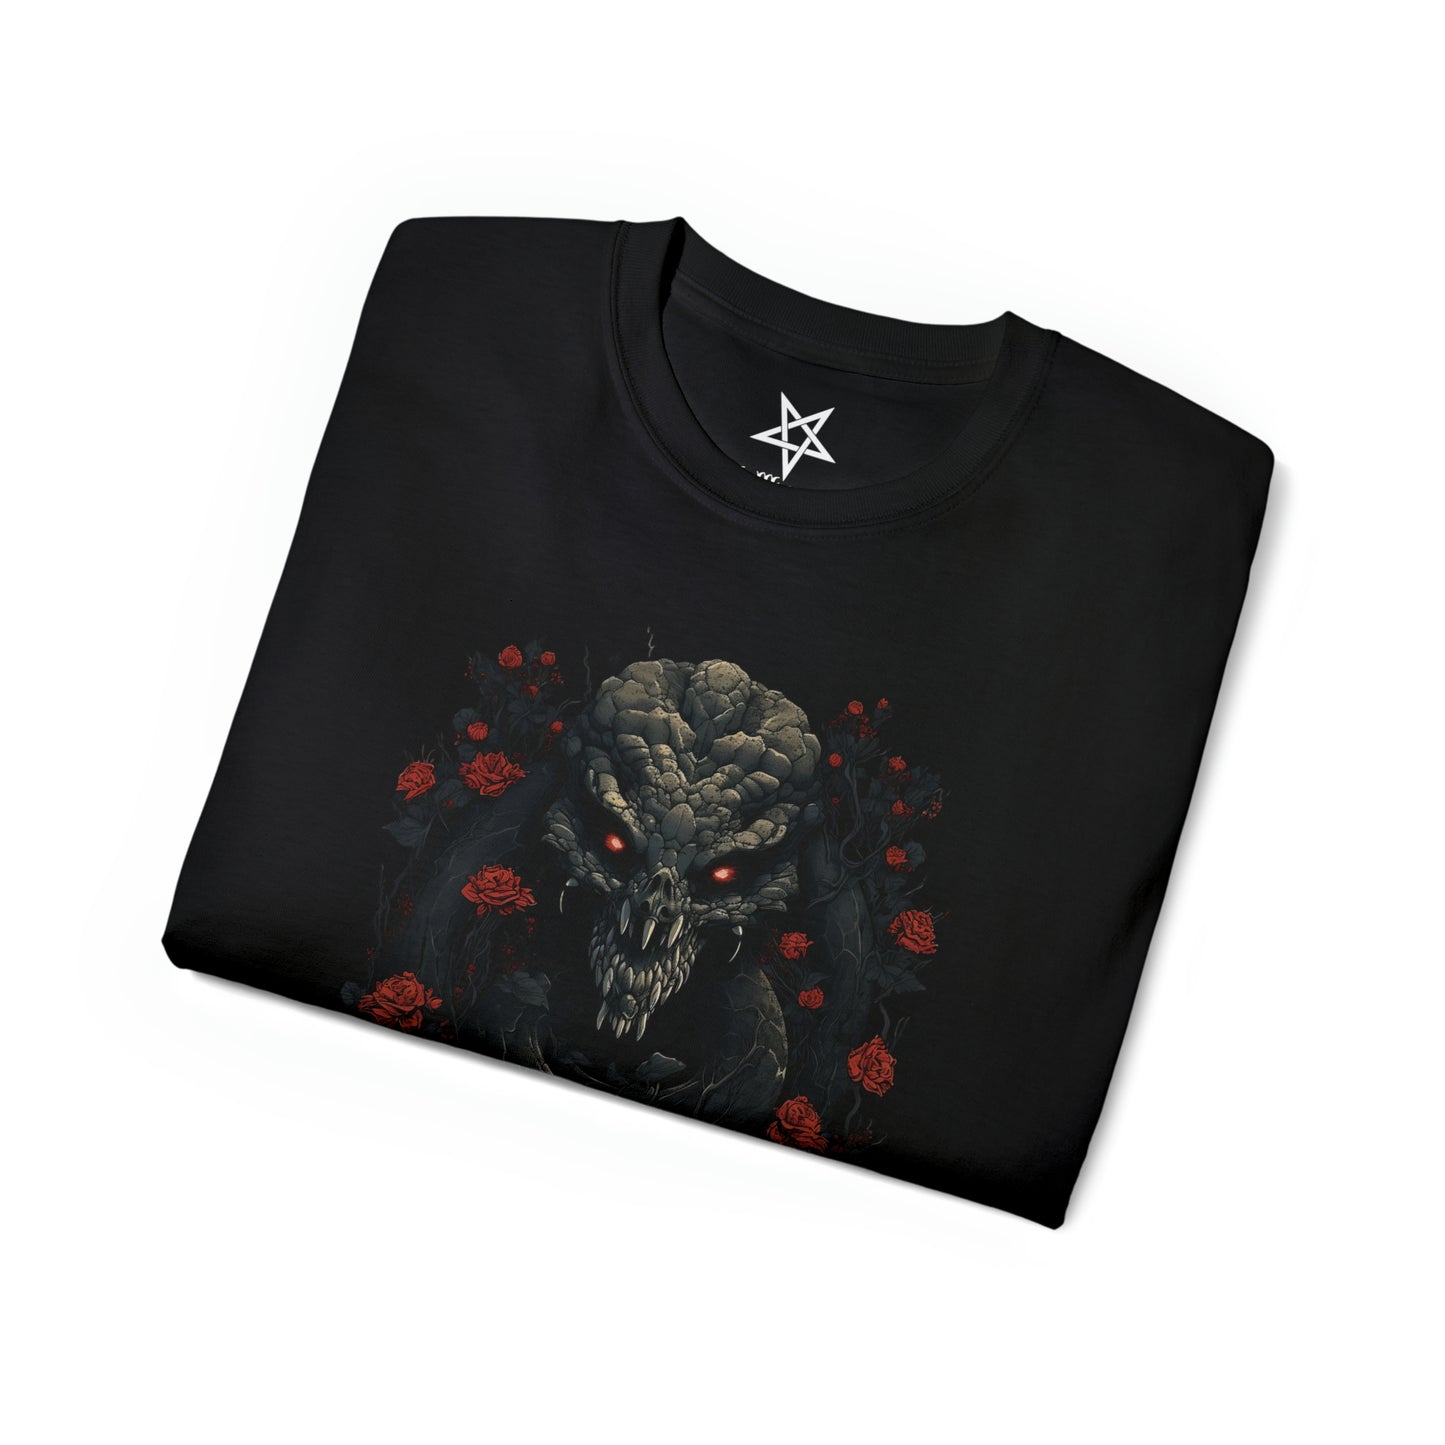 Serpens Mortis Serpent of Death T-shirt by Hellhound Clothing